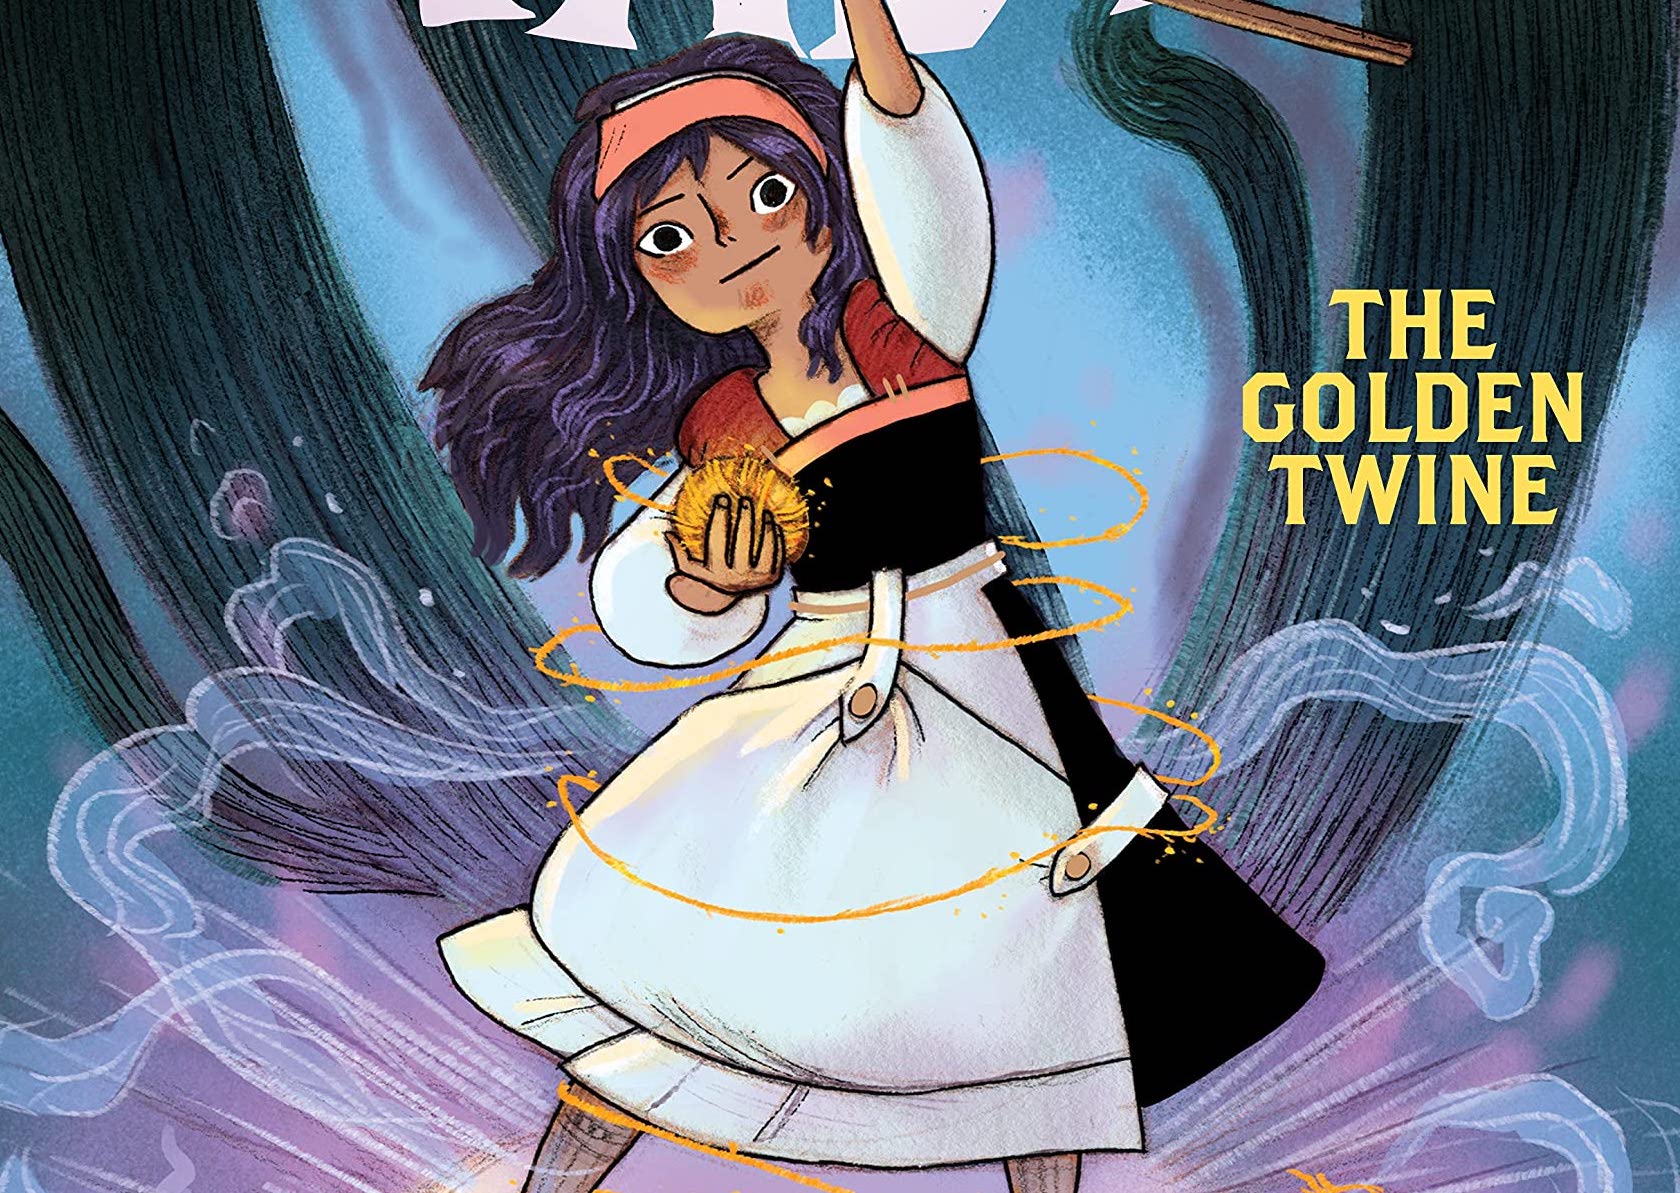 'Cat's Cradle: The Golden Twine' introduces a cozy and compelling new fantasy world